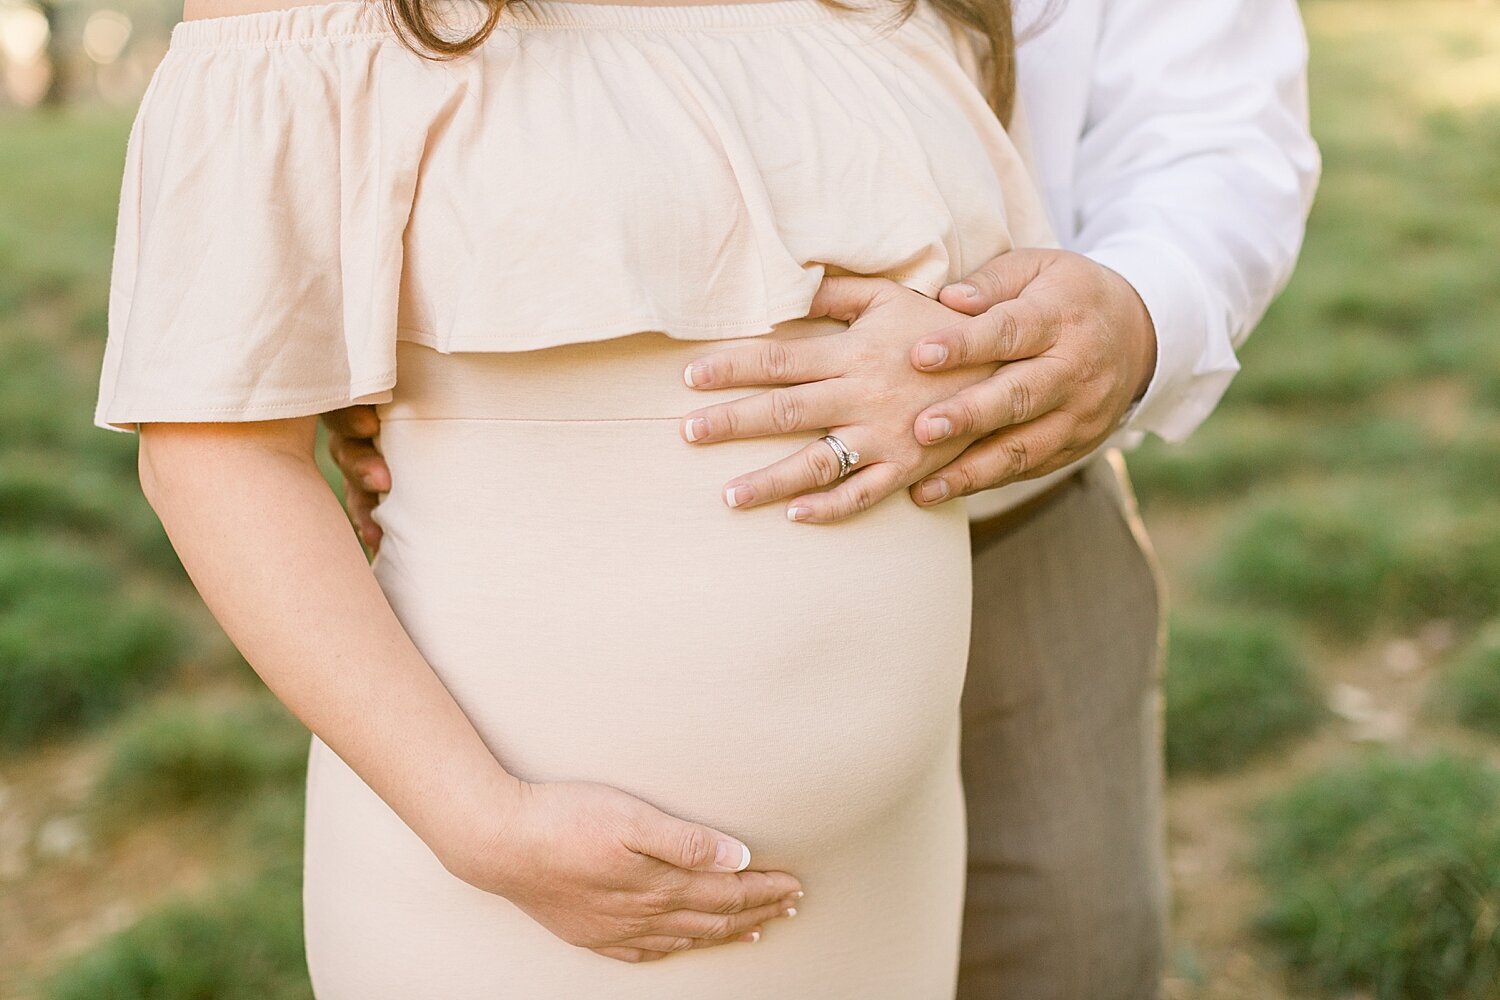 Outdoor pregnancy photoshoot | Ambre Williams Photography